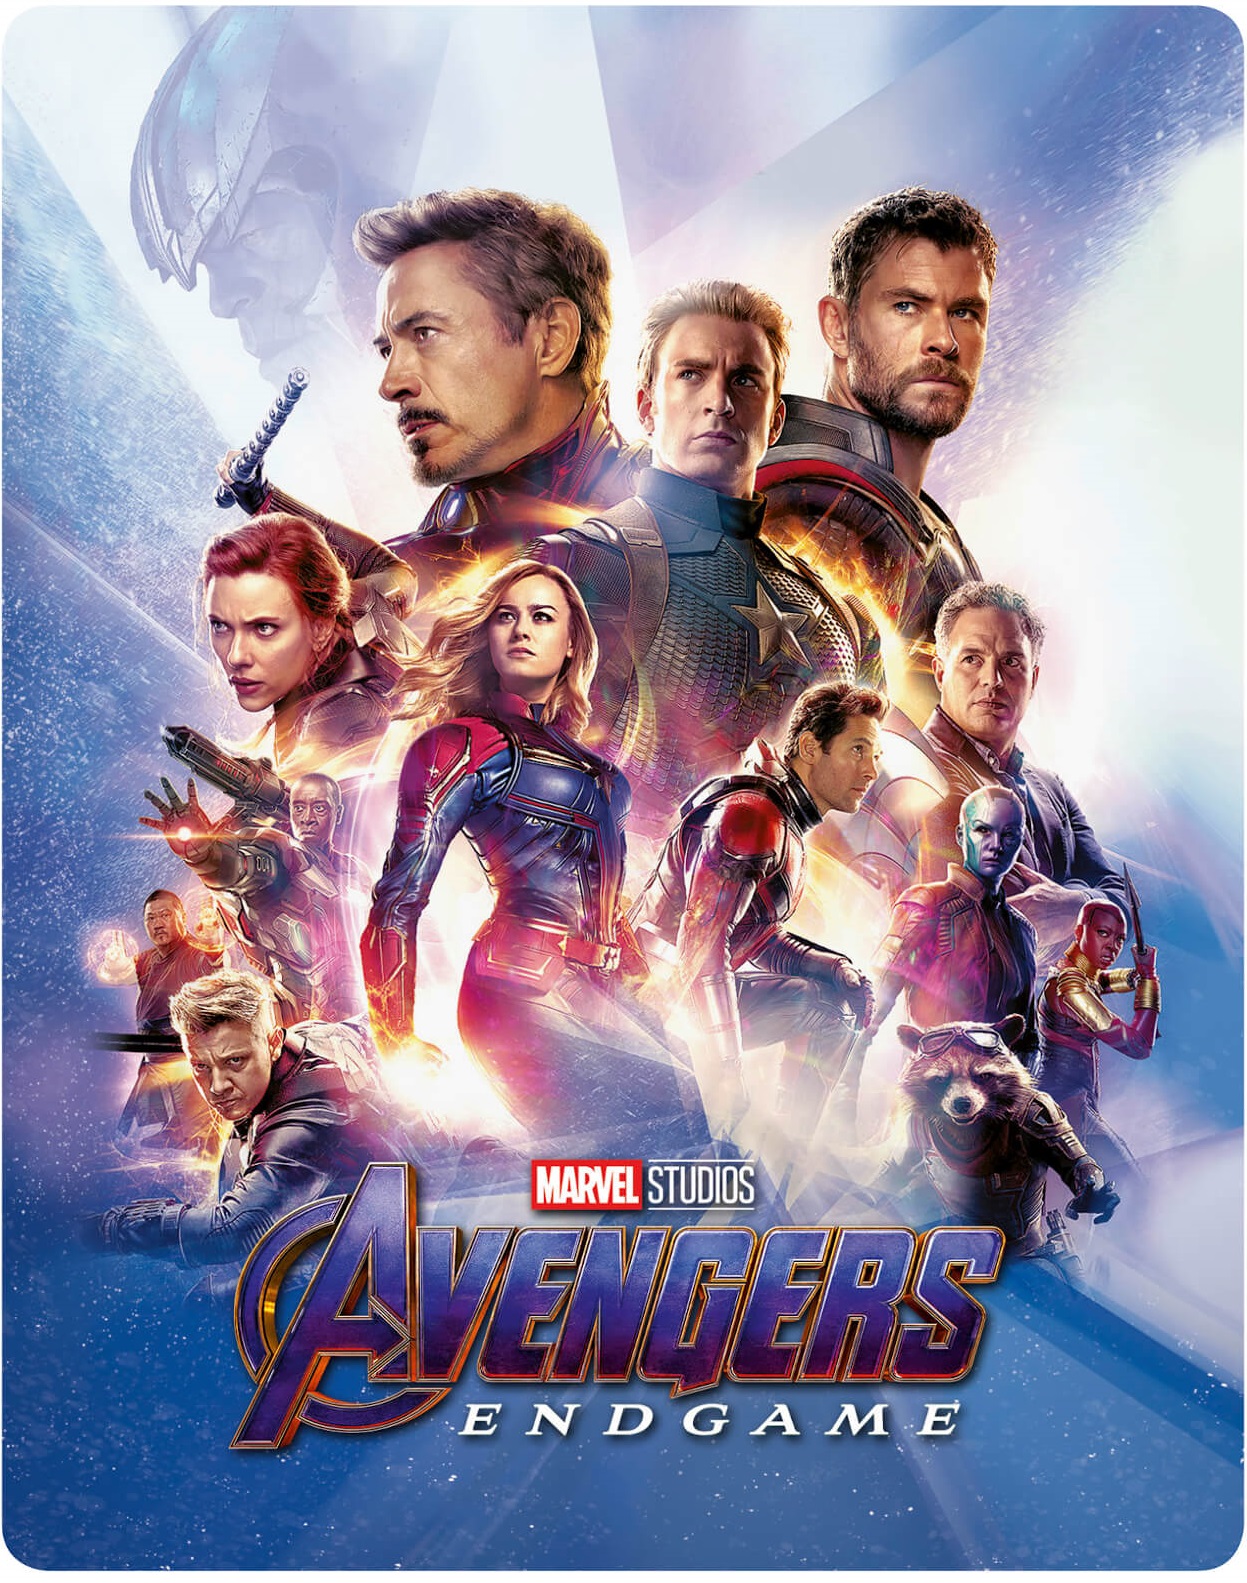 Marvel's epic Avengers: Endgame is getting a Zavvi exclusive lenticular  Steelbook release in July - Steelbook Blu-ray News